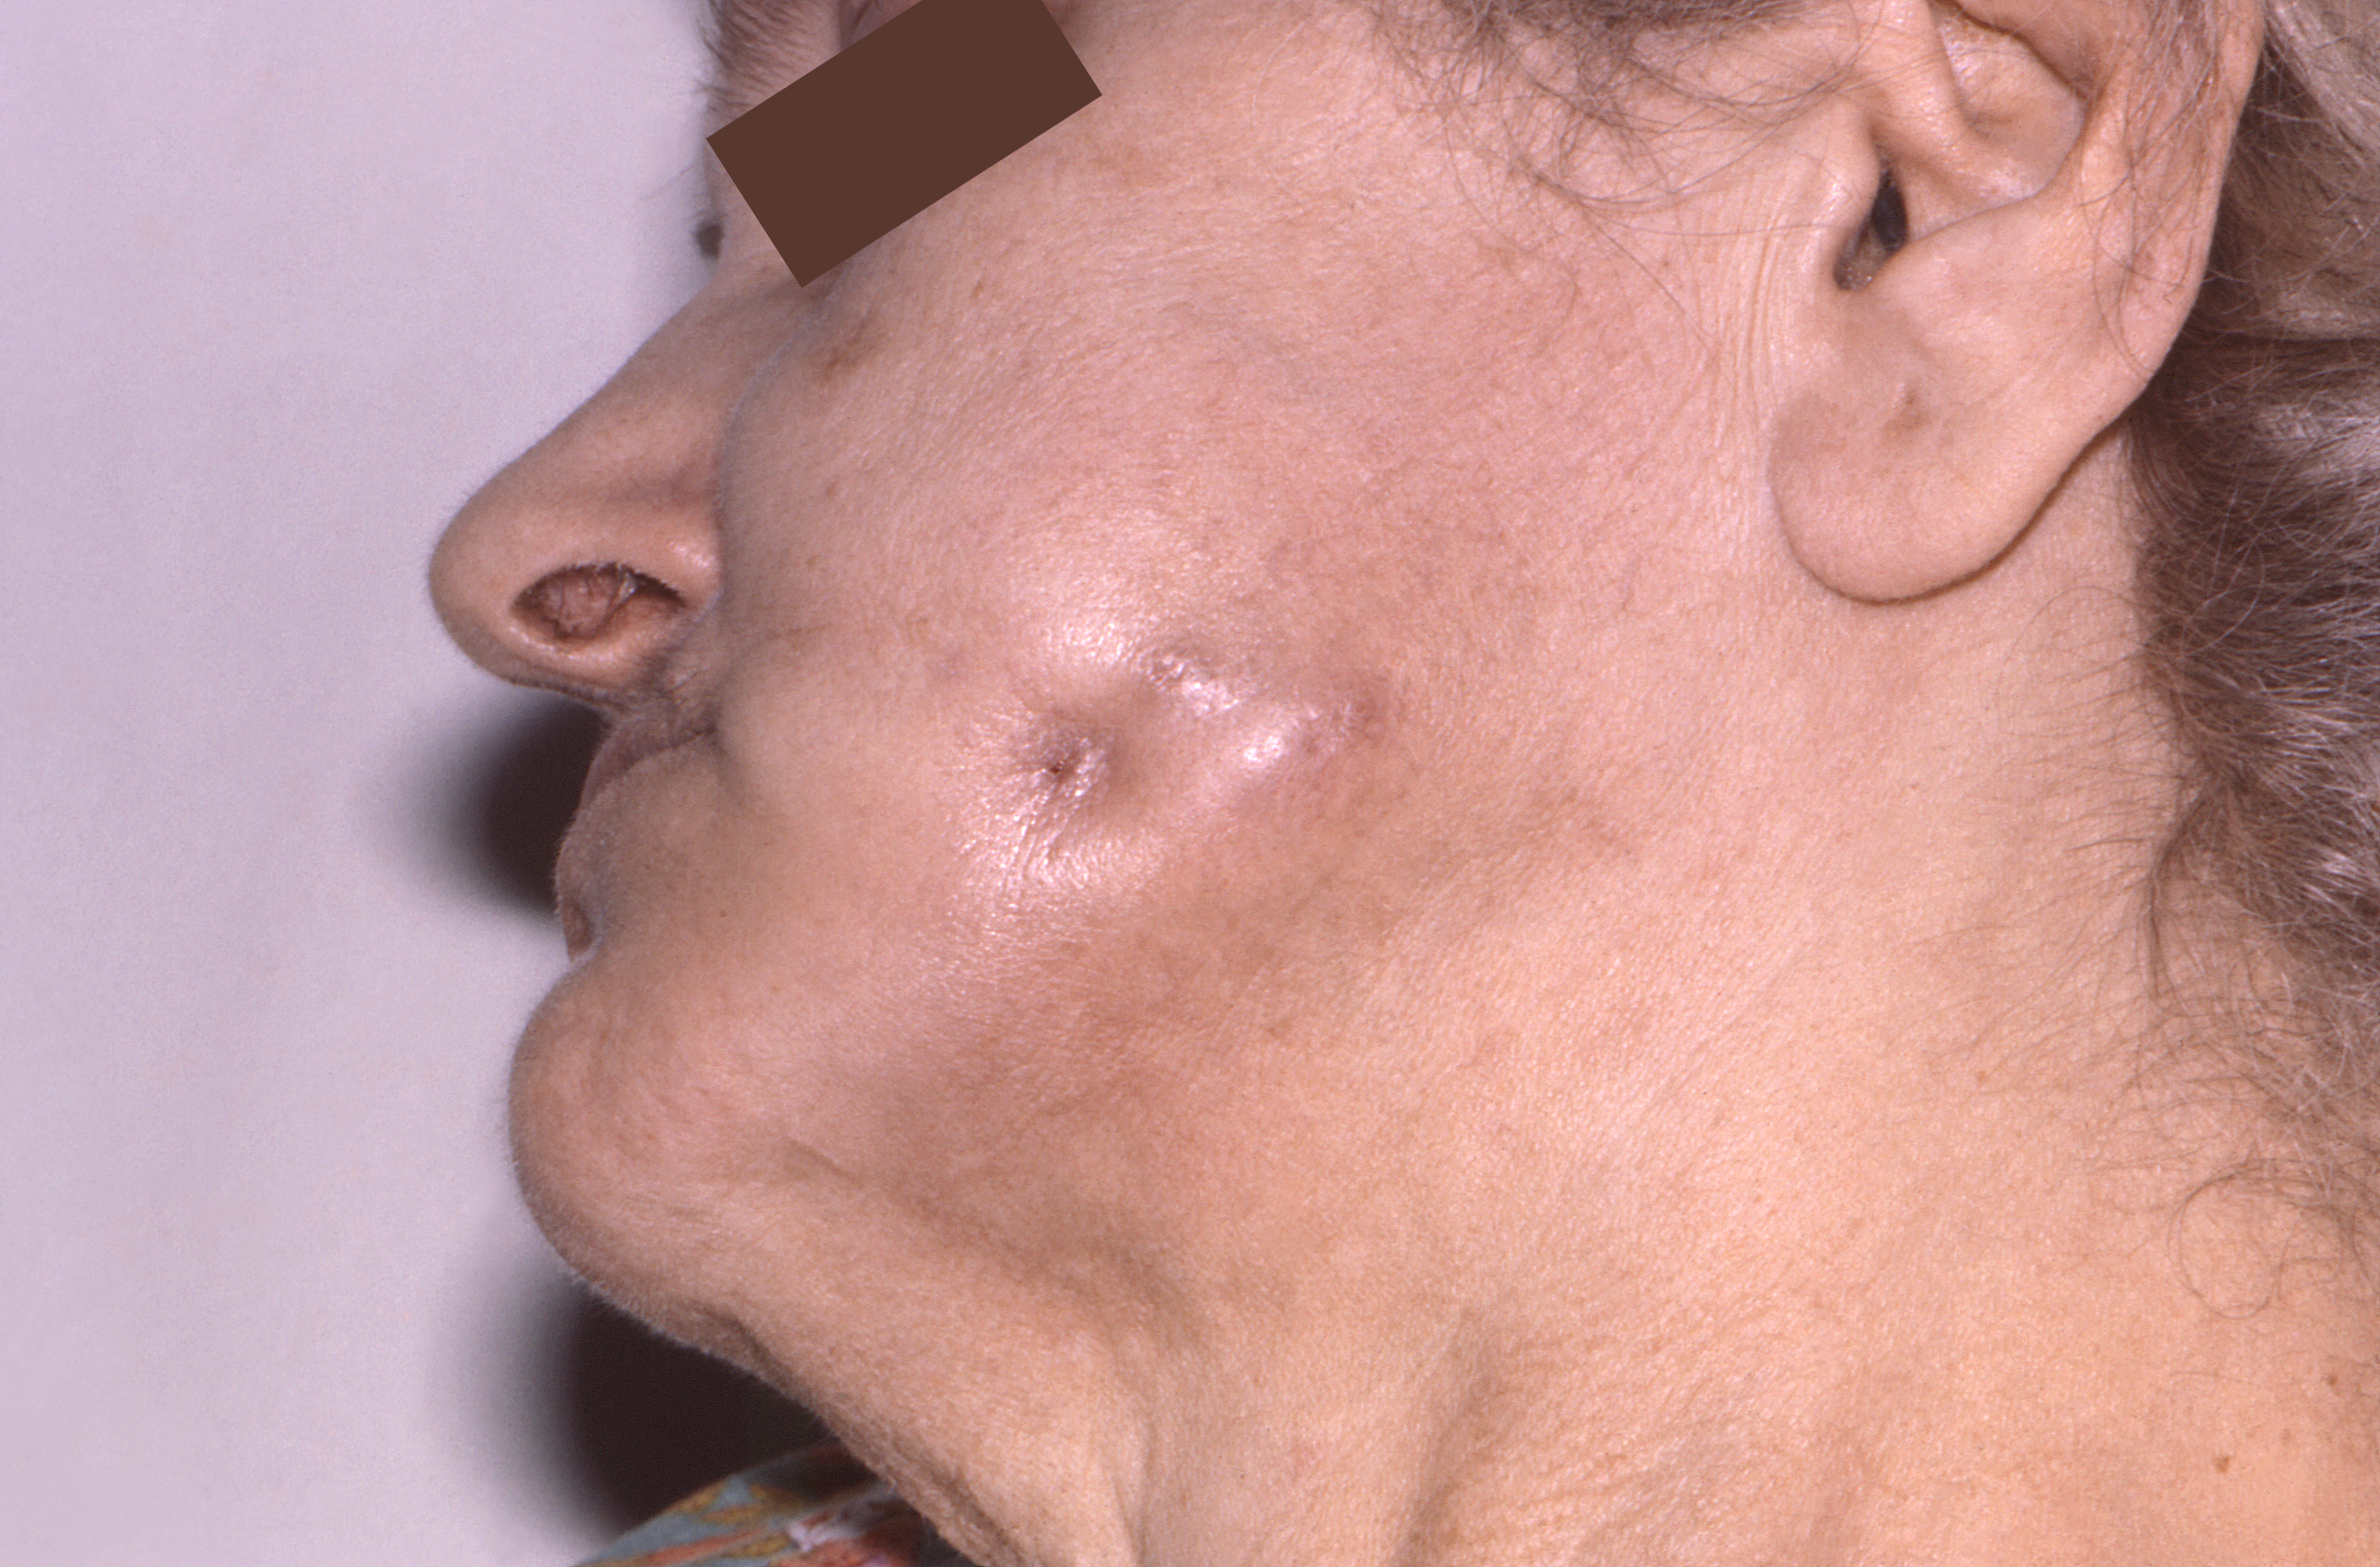 Seen from the left lateral perspective, this female patient displayed a fistula that had formed on the region of her left cheek, which had been brought on by an infection known as actinomycosis, or mycetoma, caused by the Gram-positive, fungus-like aerobic bacteria of the order Actinomycetales